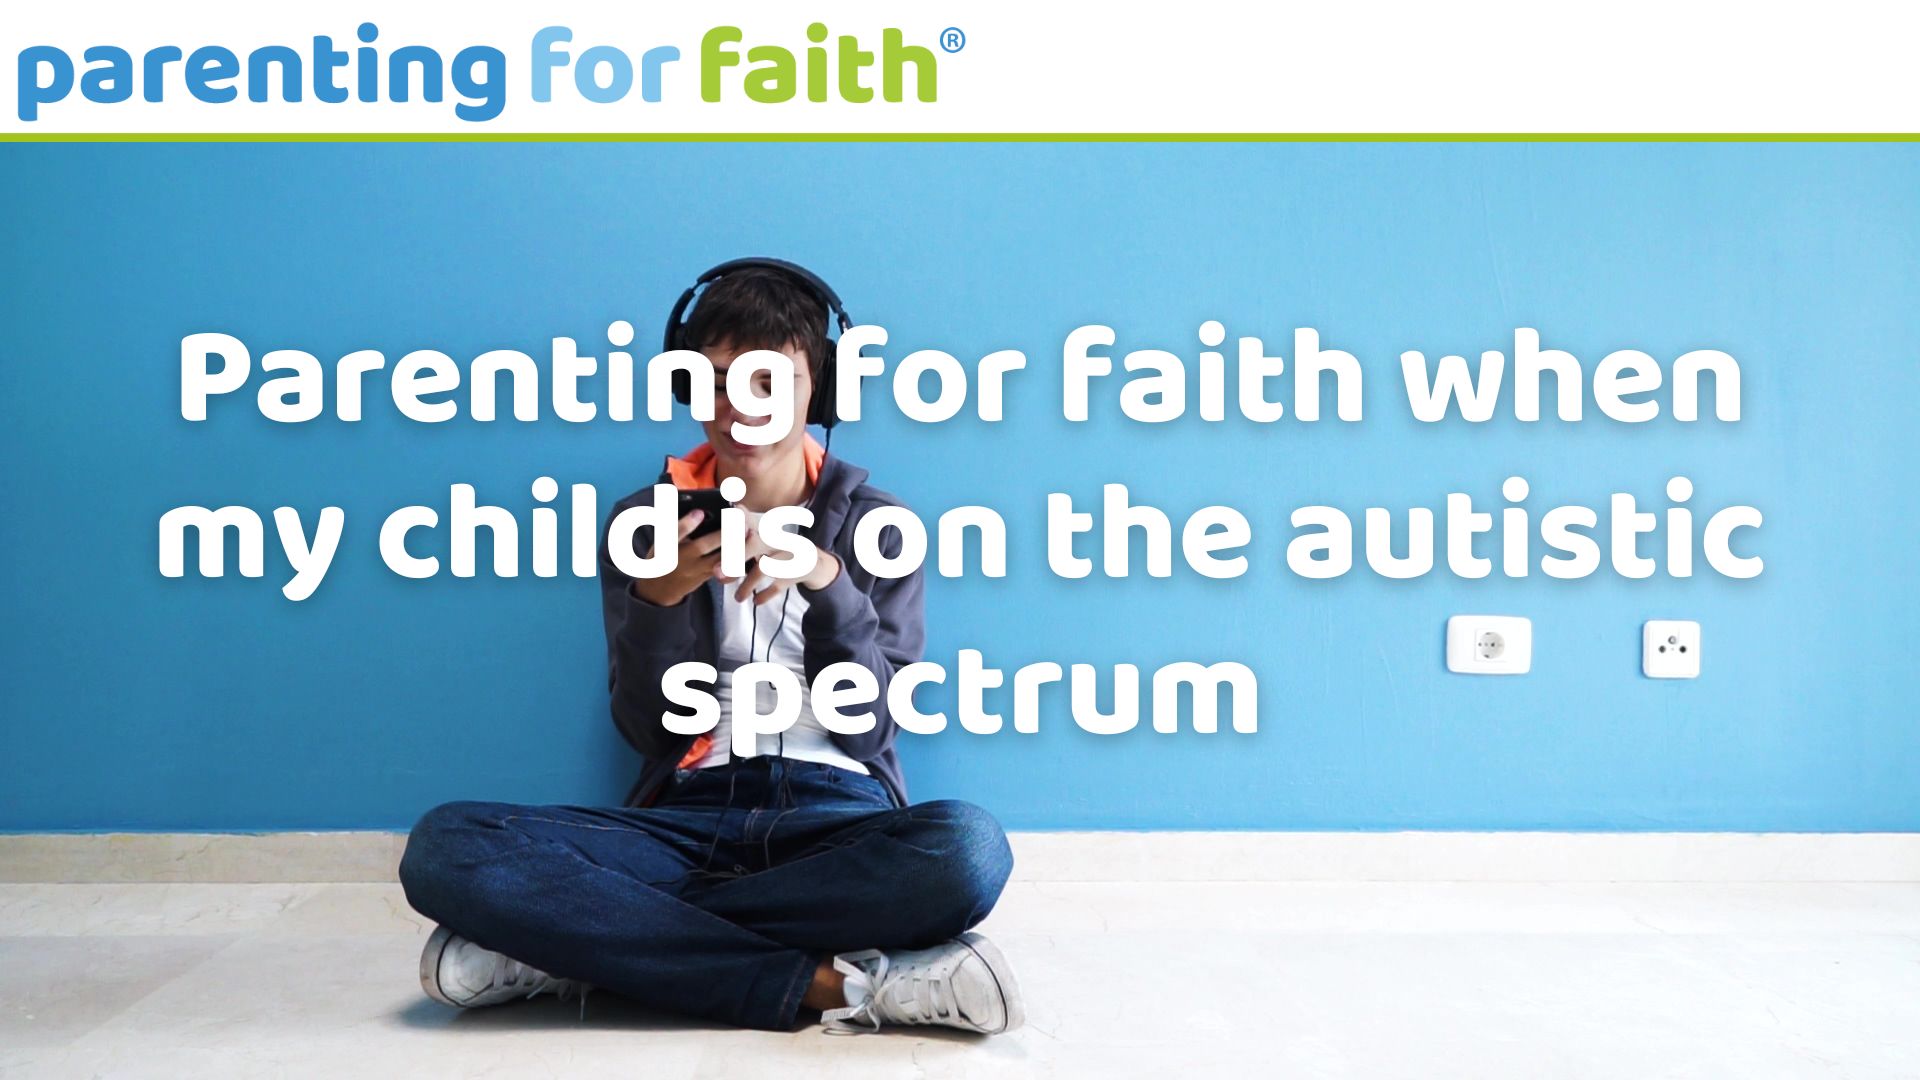 Parenting for faith when my child is on the autistic spectrum image credit Neirfy